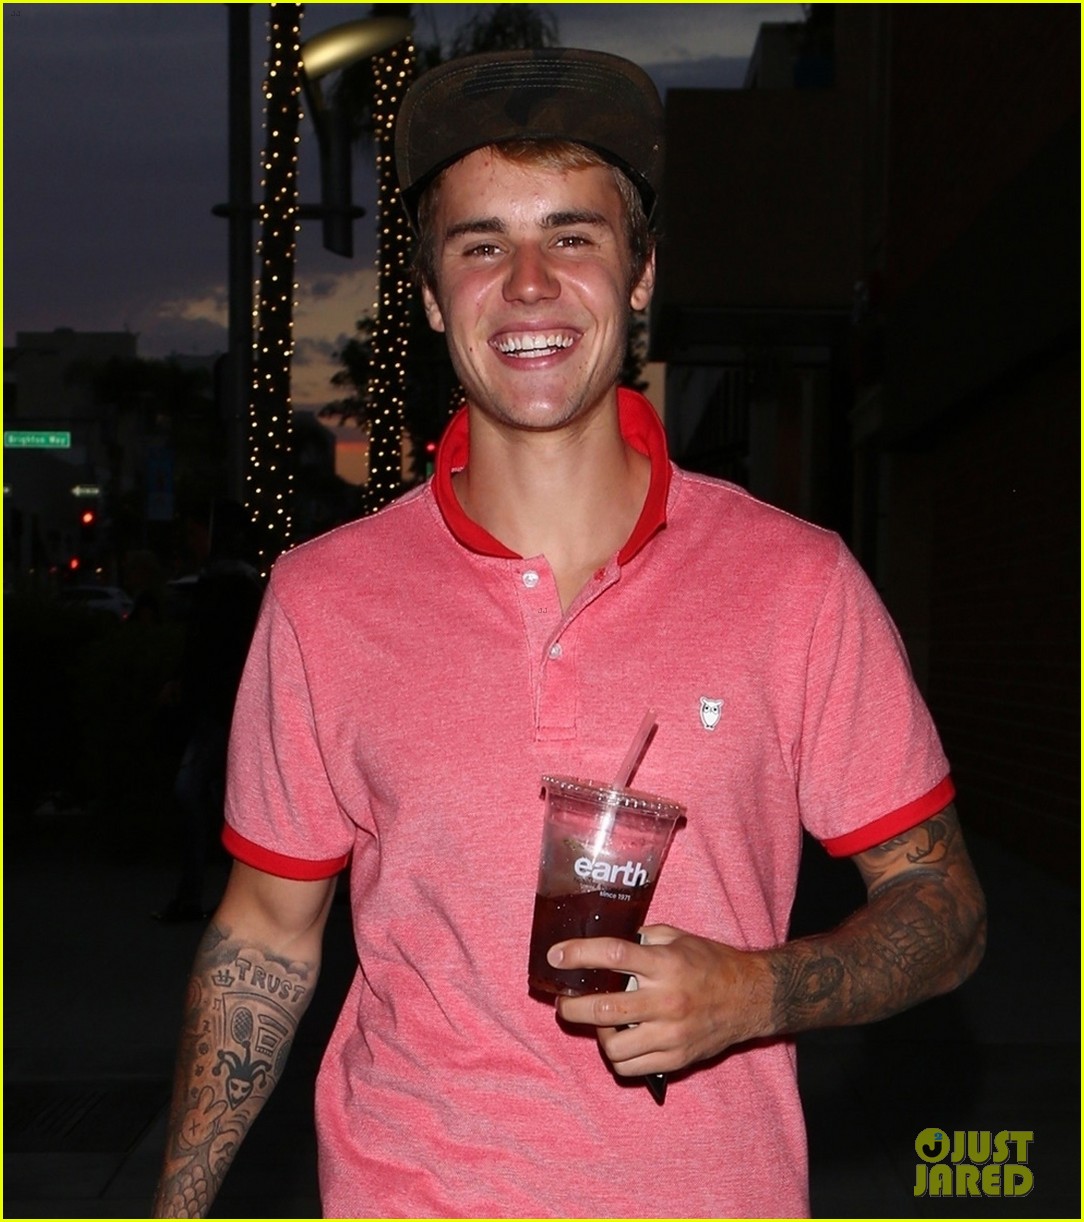 Justin Bieber Can Hardly Contain His Smile After Dinner! | Photo ...